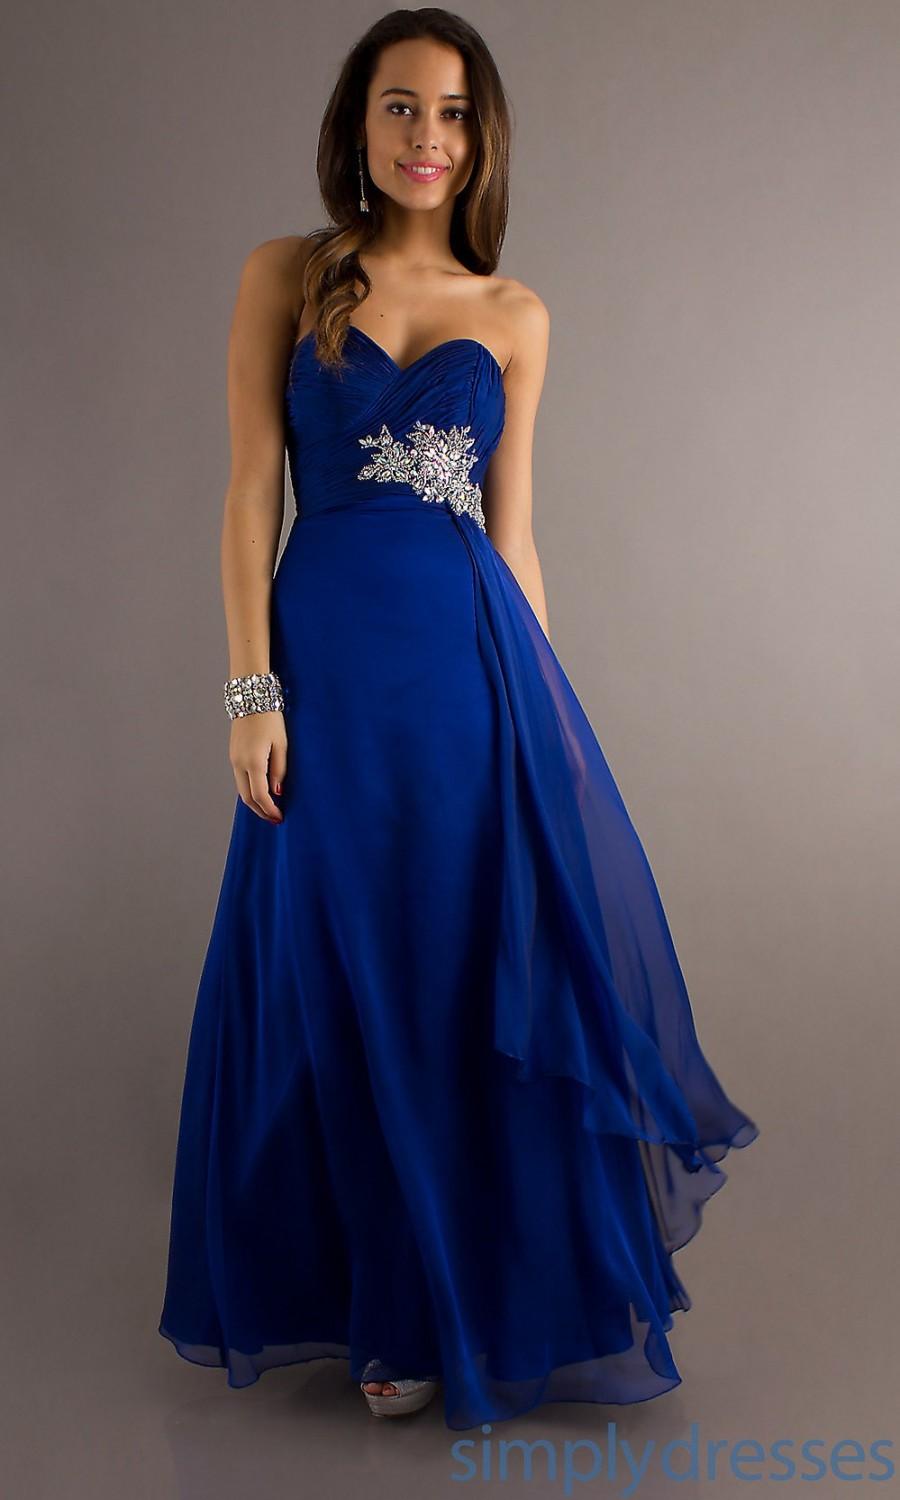 Luxurious Strapless A-line Beaded Sweetheart Temptation Royal Blue